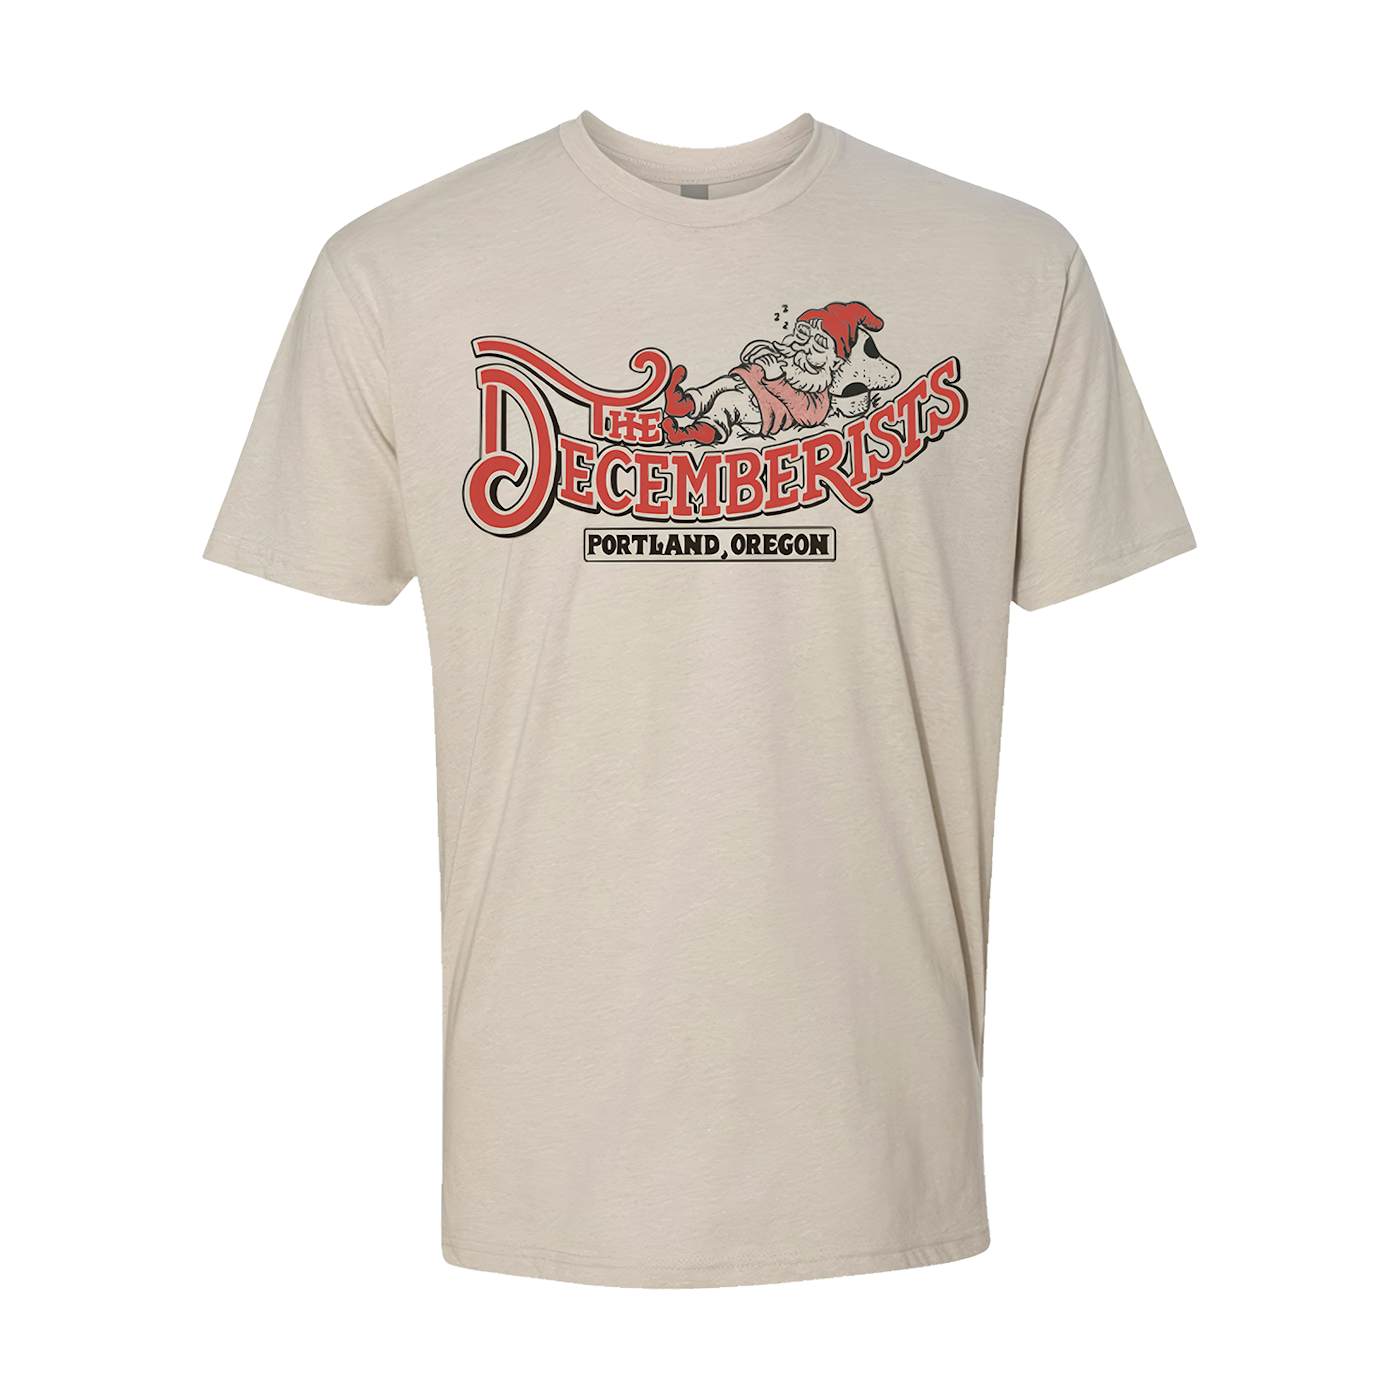 The Decemberists Gnome Tee